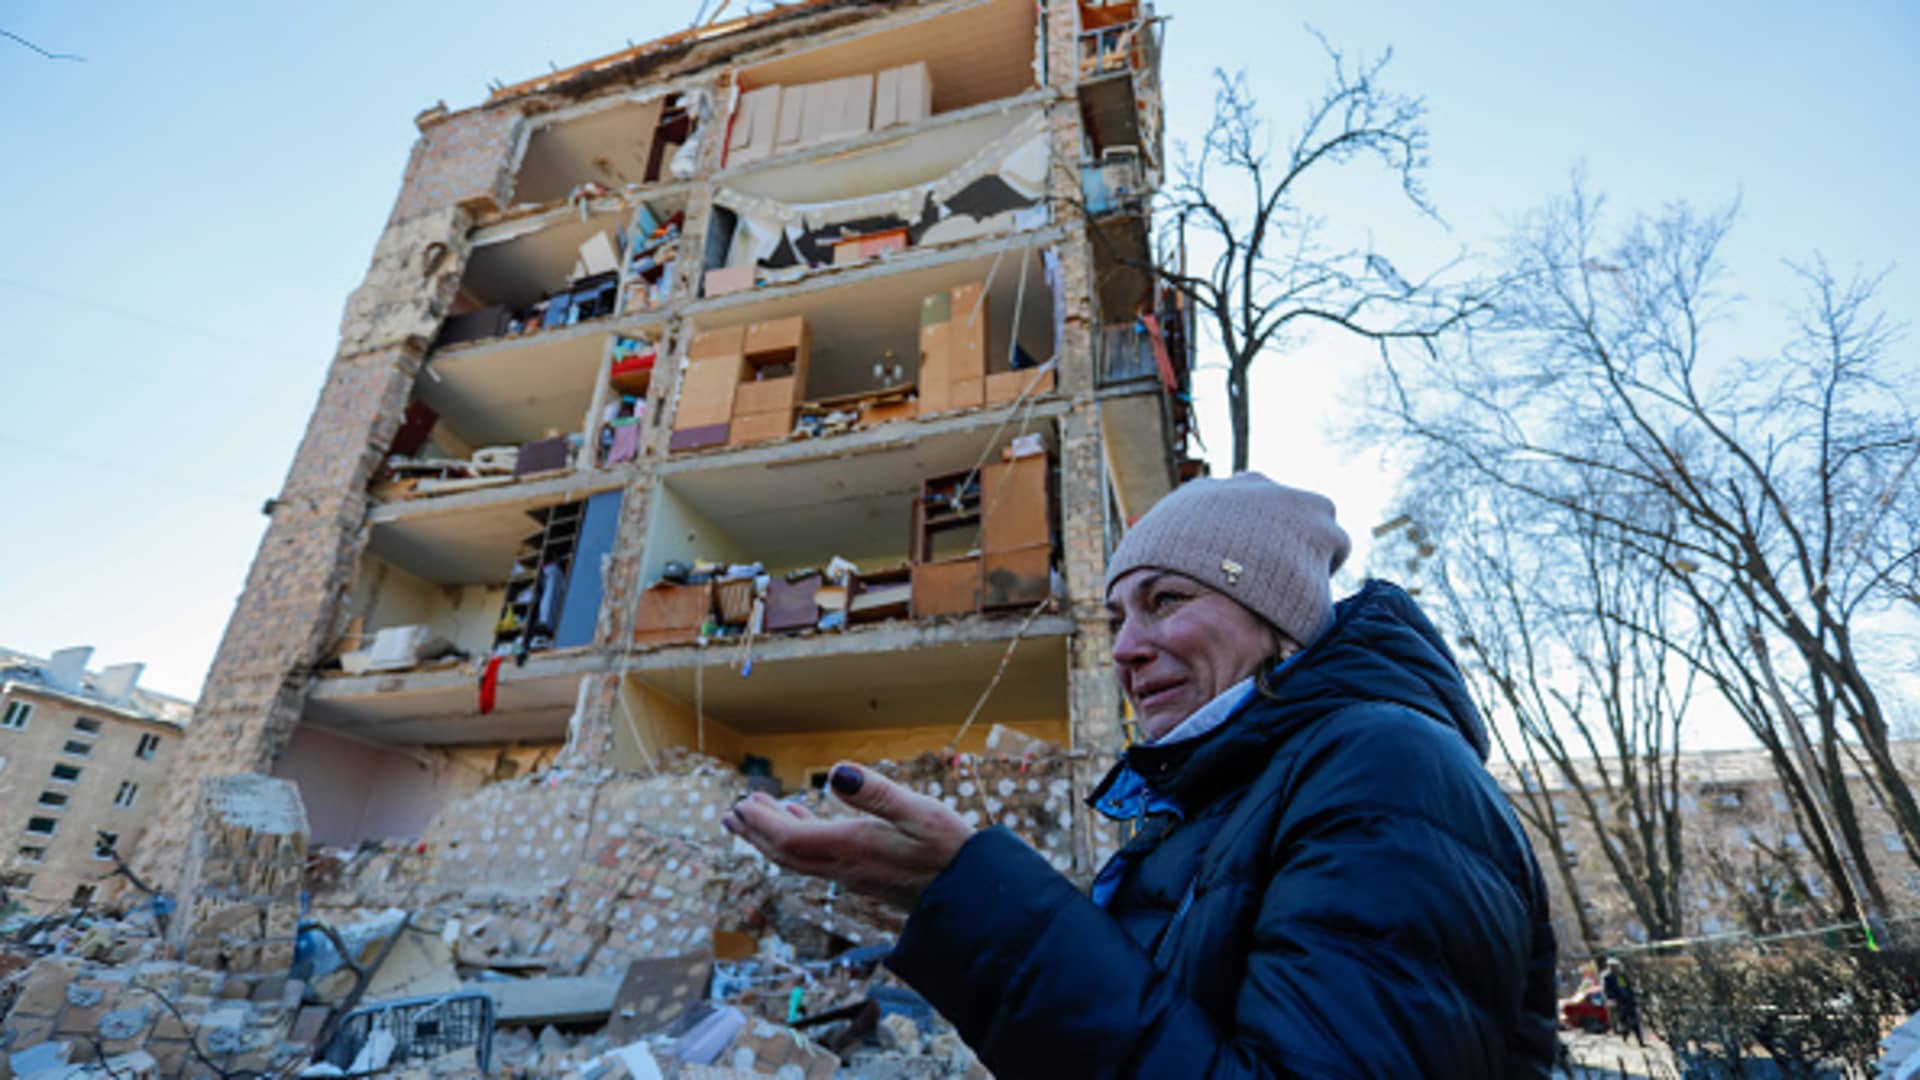 A Ukrainian woman cries outside a destroyed residential building by artillery in a residential area in Kyiv amid Russian Invasion, in Kyiv, Ukraine, 18 March 2022.